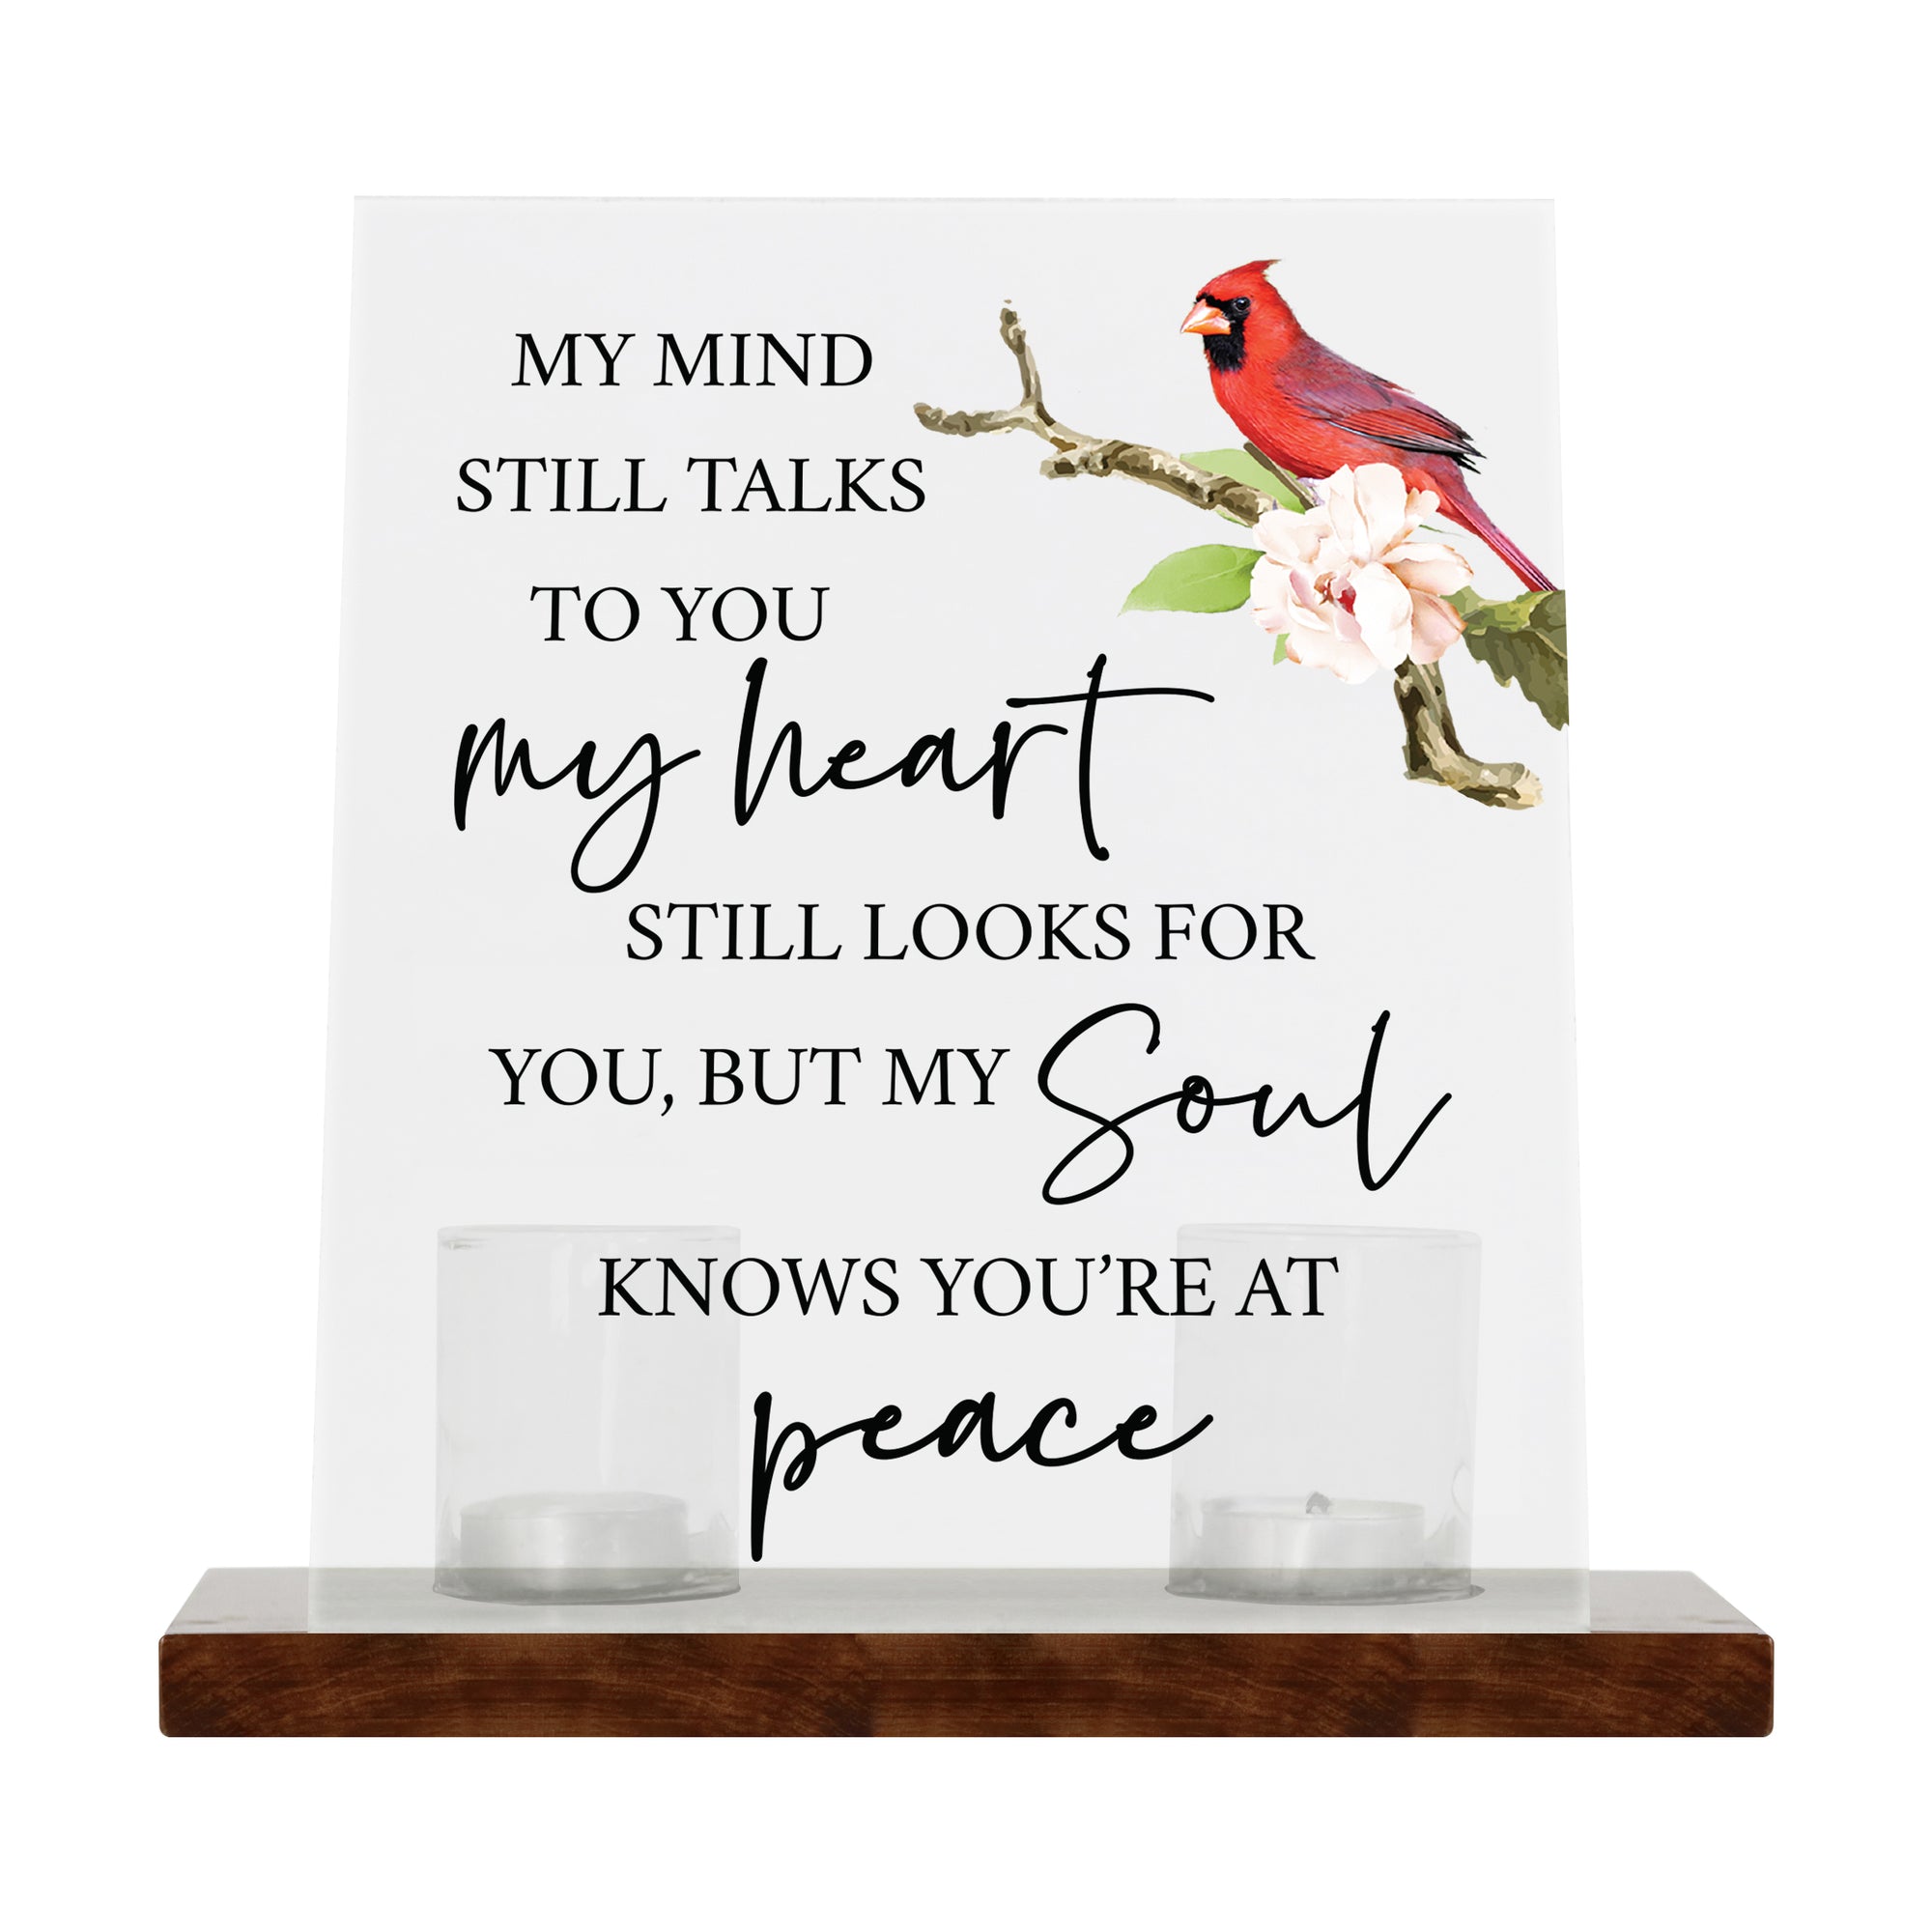 Vintage Memorial Cardinal Acrylic Sign Candle Holder With Wood Base And Glass Votives For Home Décor | My Mind Still Talks